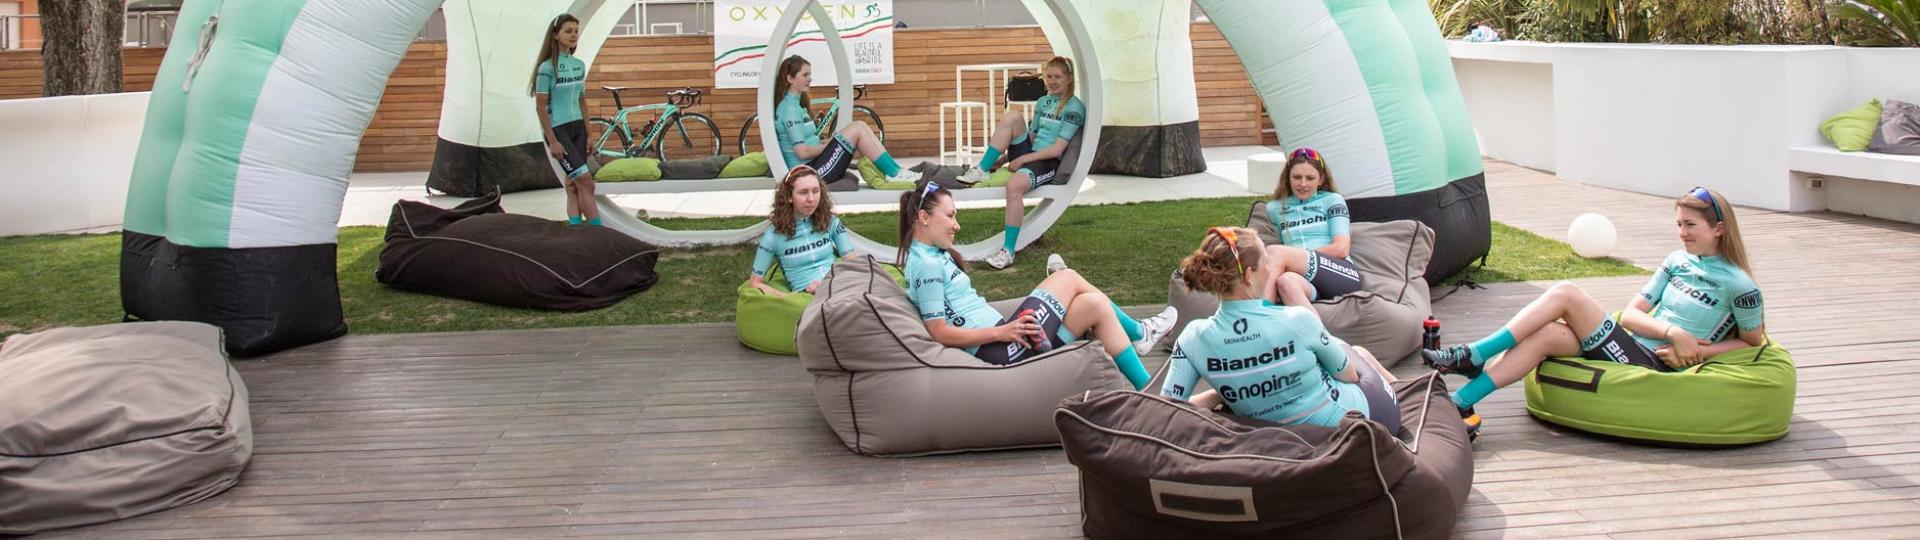 cycling.oxygenhotel fr velo-histoire-et-traditions-a-l-hotel-a-rimini 014